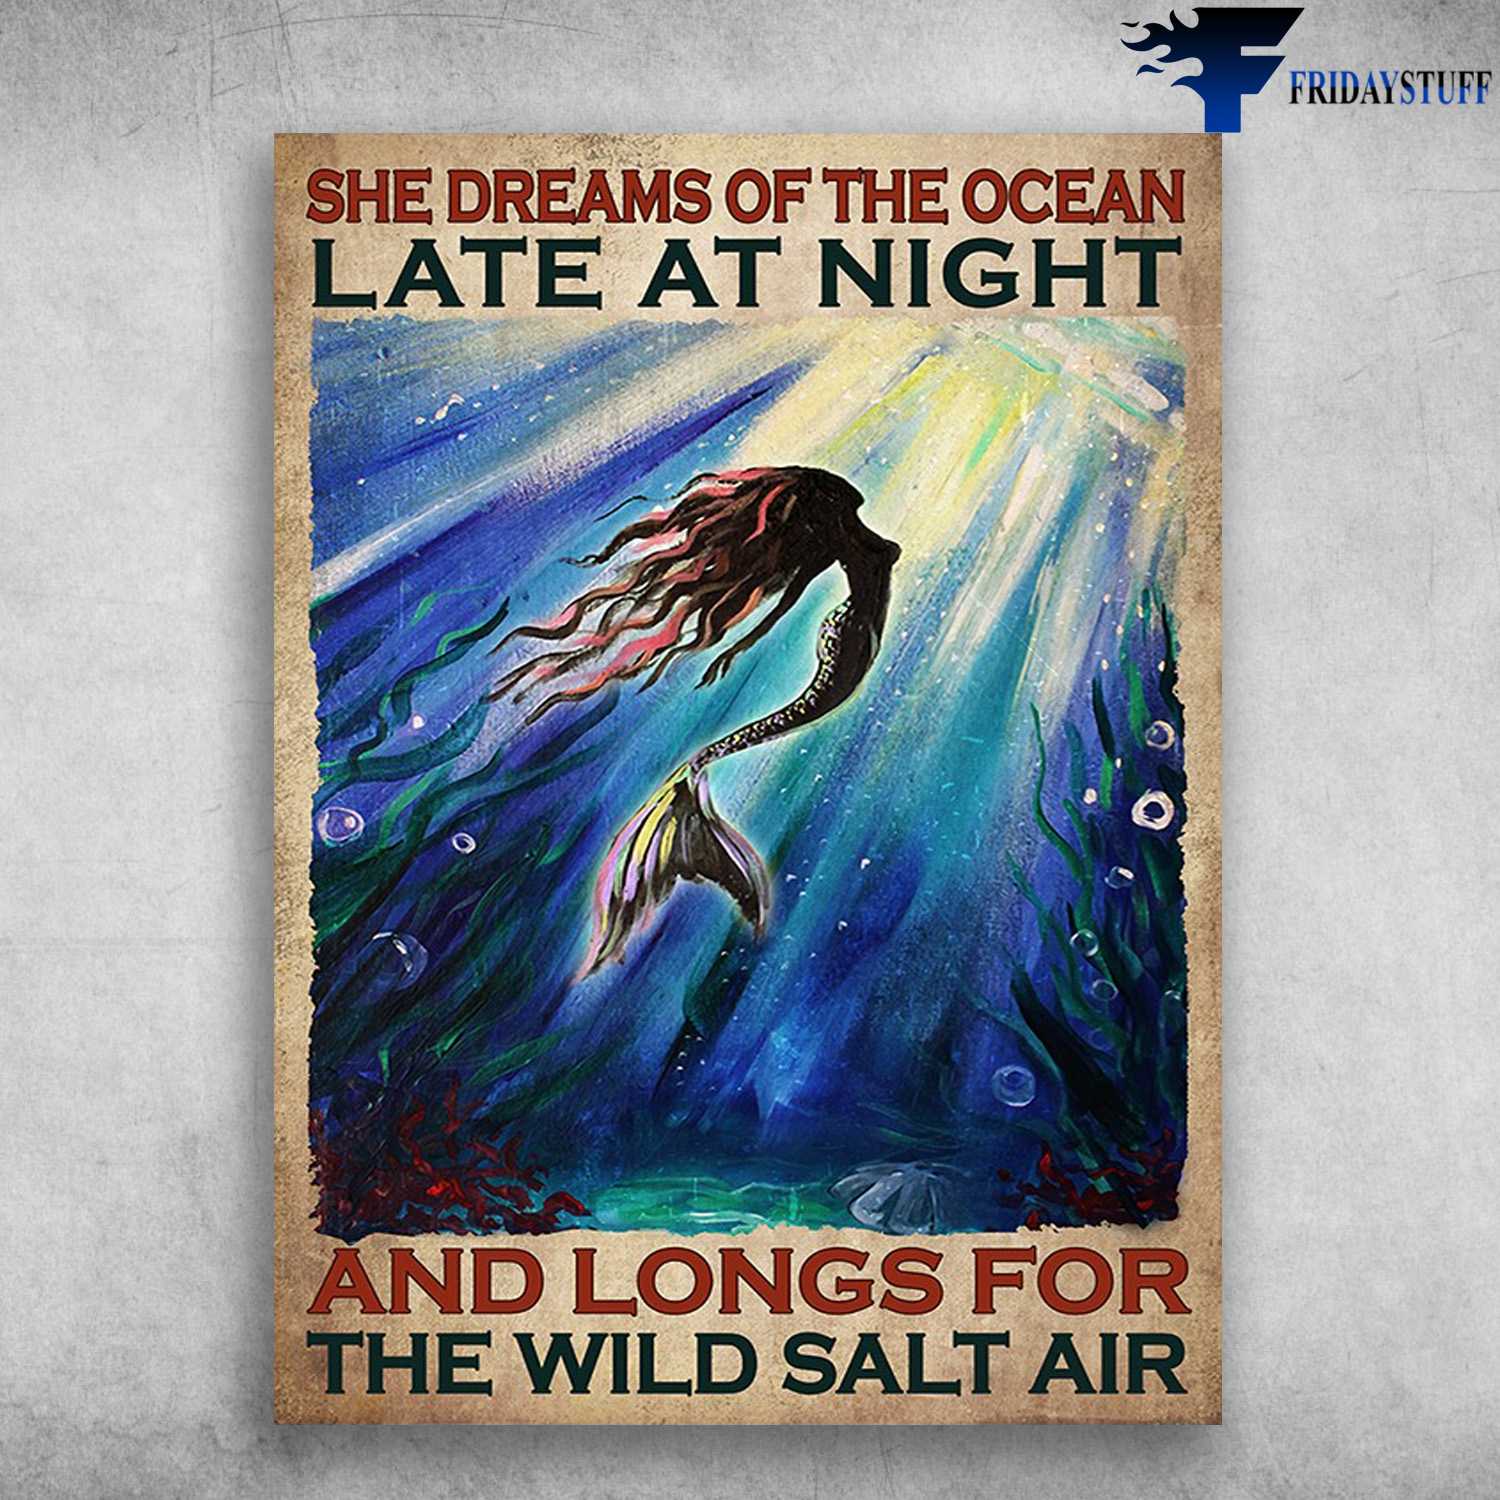 Mermaid Poster - She Dreams Of The Ocean, Late At Night, And Longs For The Wild Salt Air